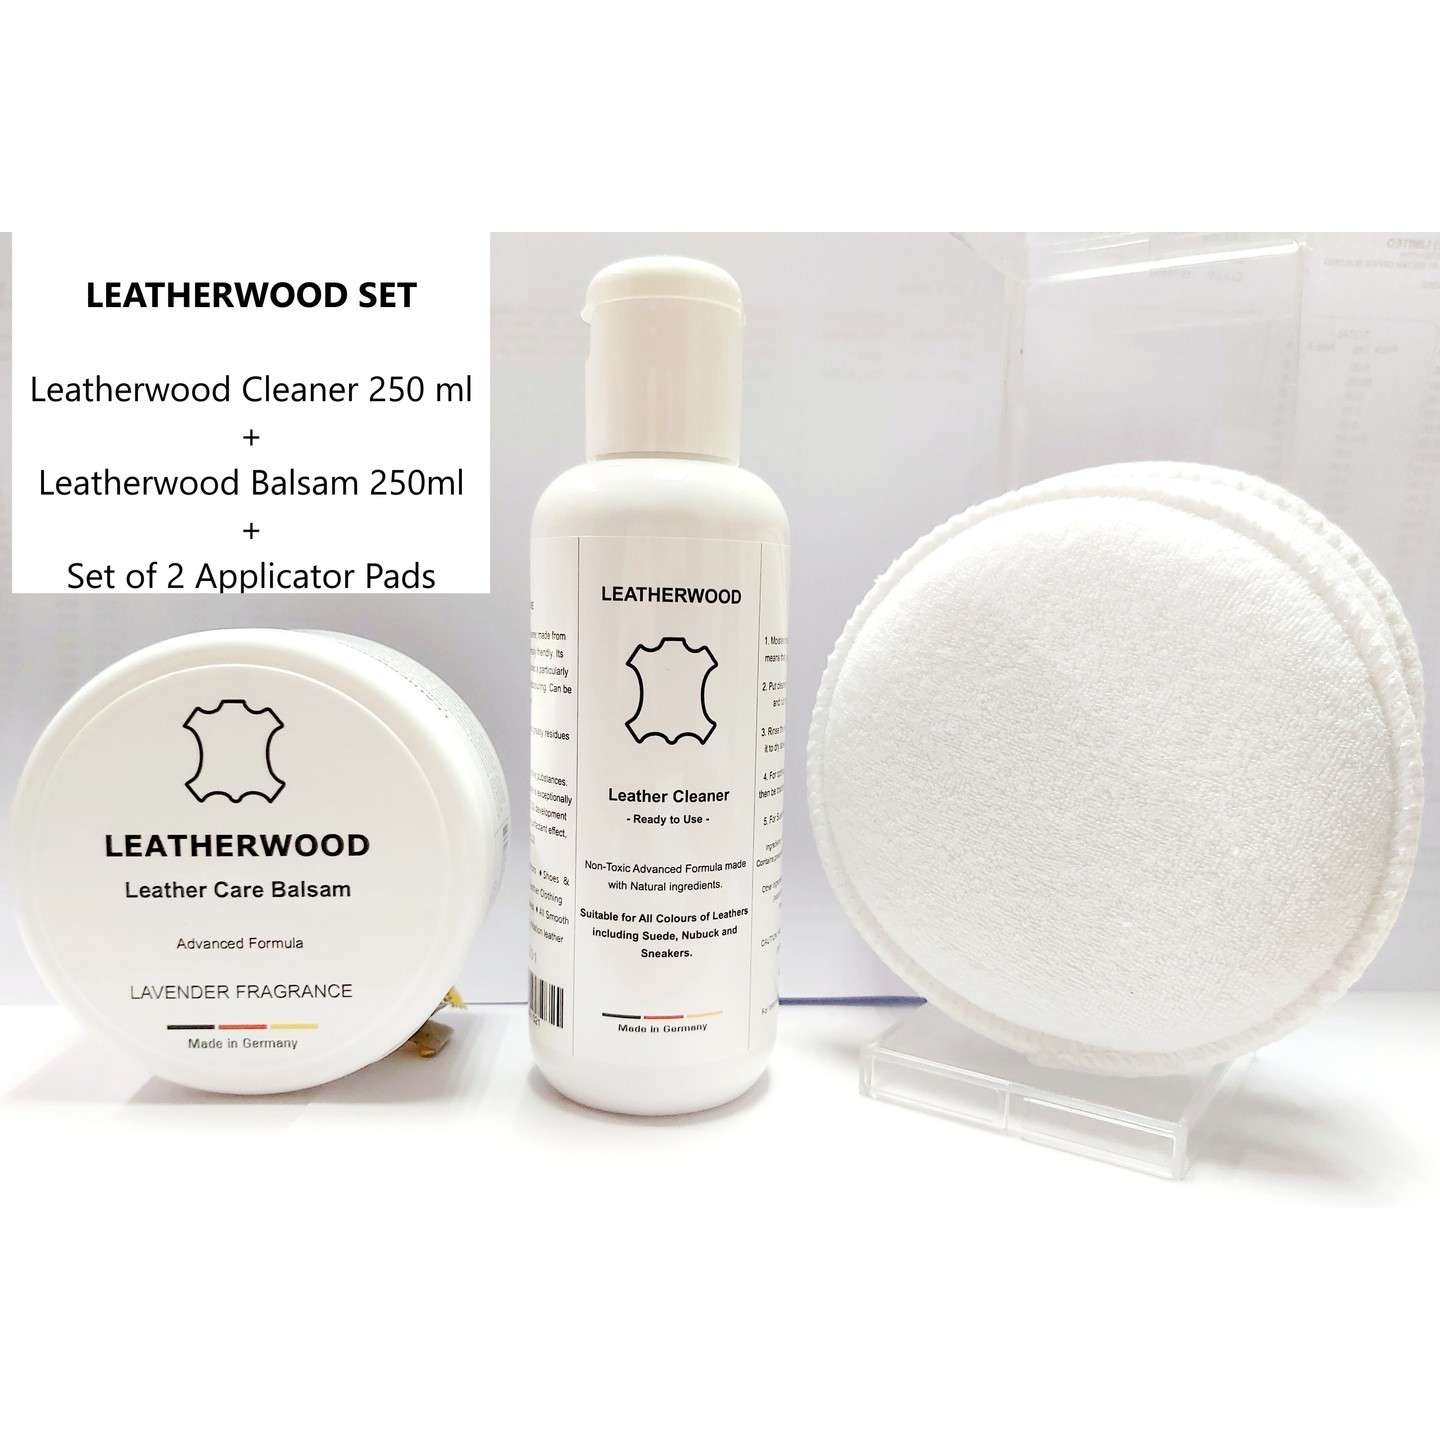 Leatherwood Leathercare Set Cleaner + Balsam + 2 Applicator Pads